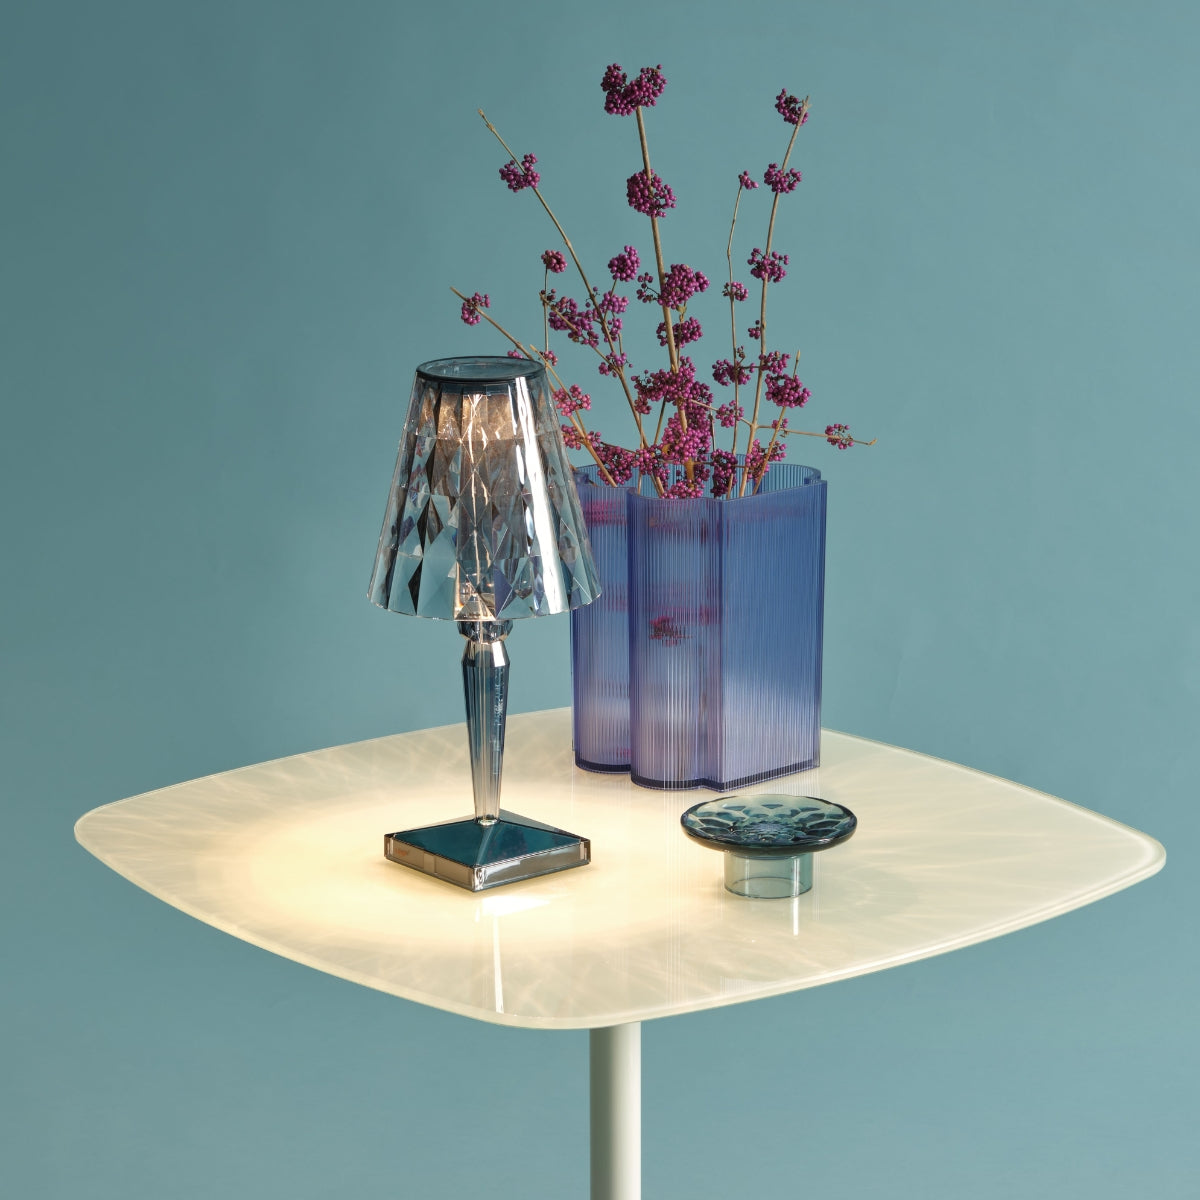 Thierry Bistrot Table - Kartell